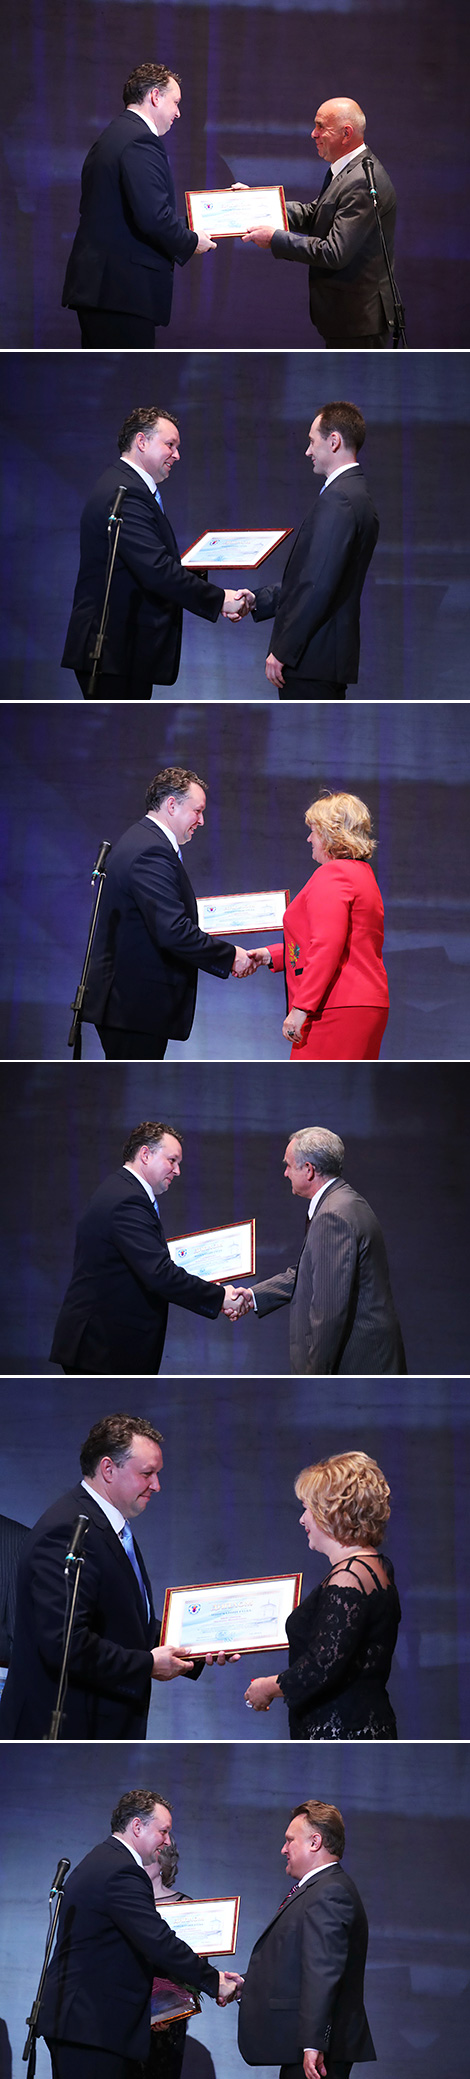 Minsk Citizen of the Year 2017 awards ceremony